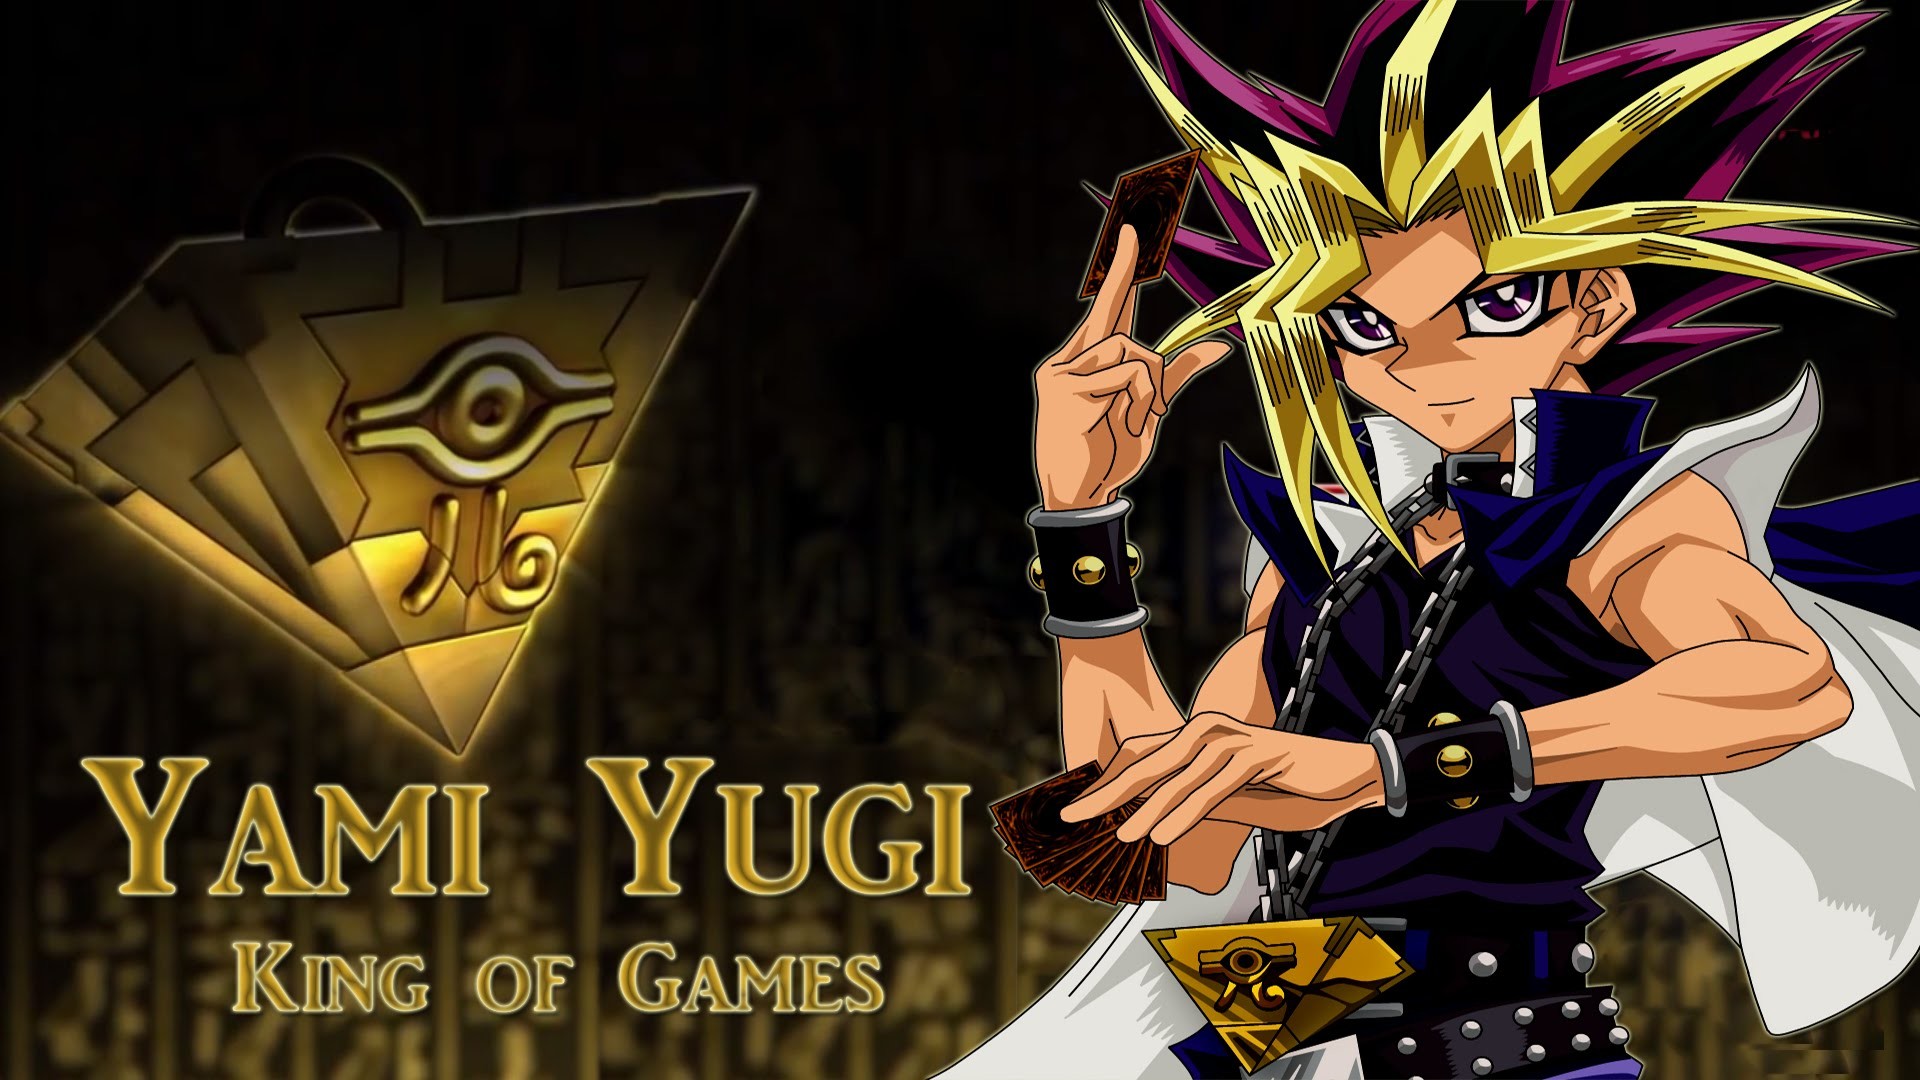 Yu Gi Oh Image HD Wallpaper And Background Photos